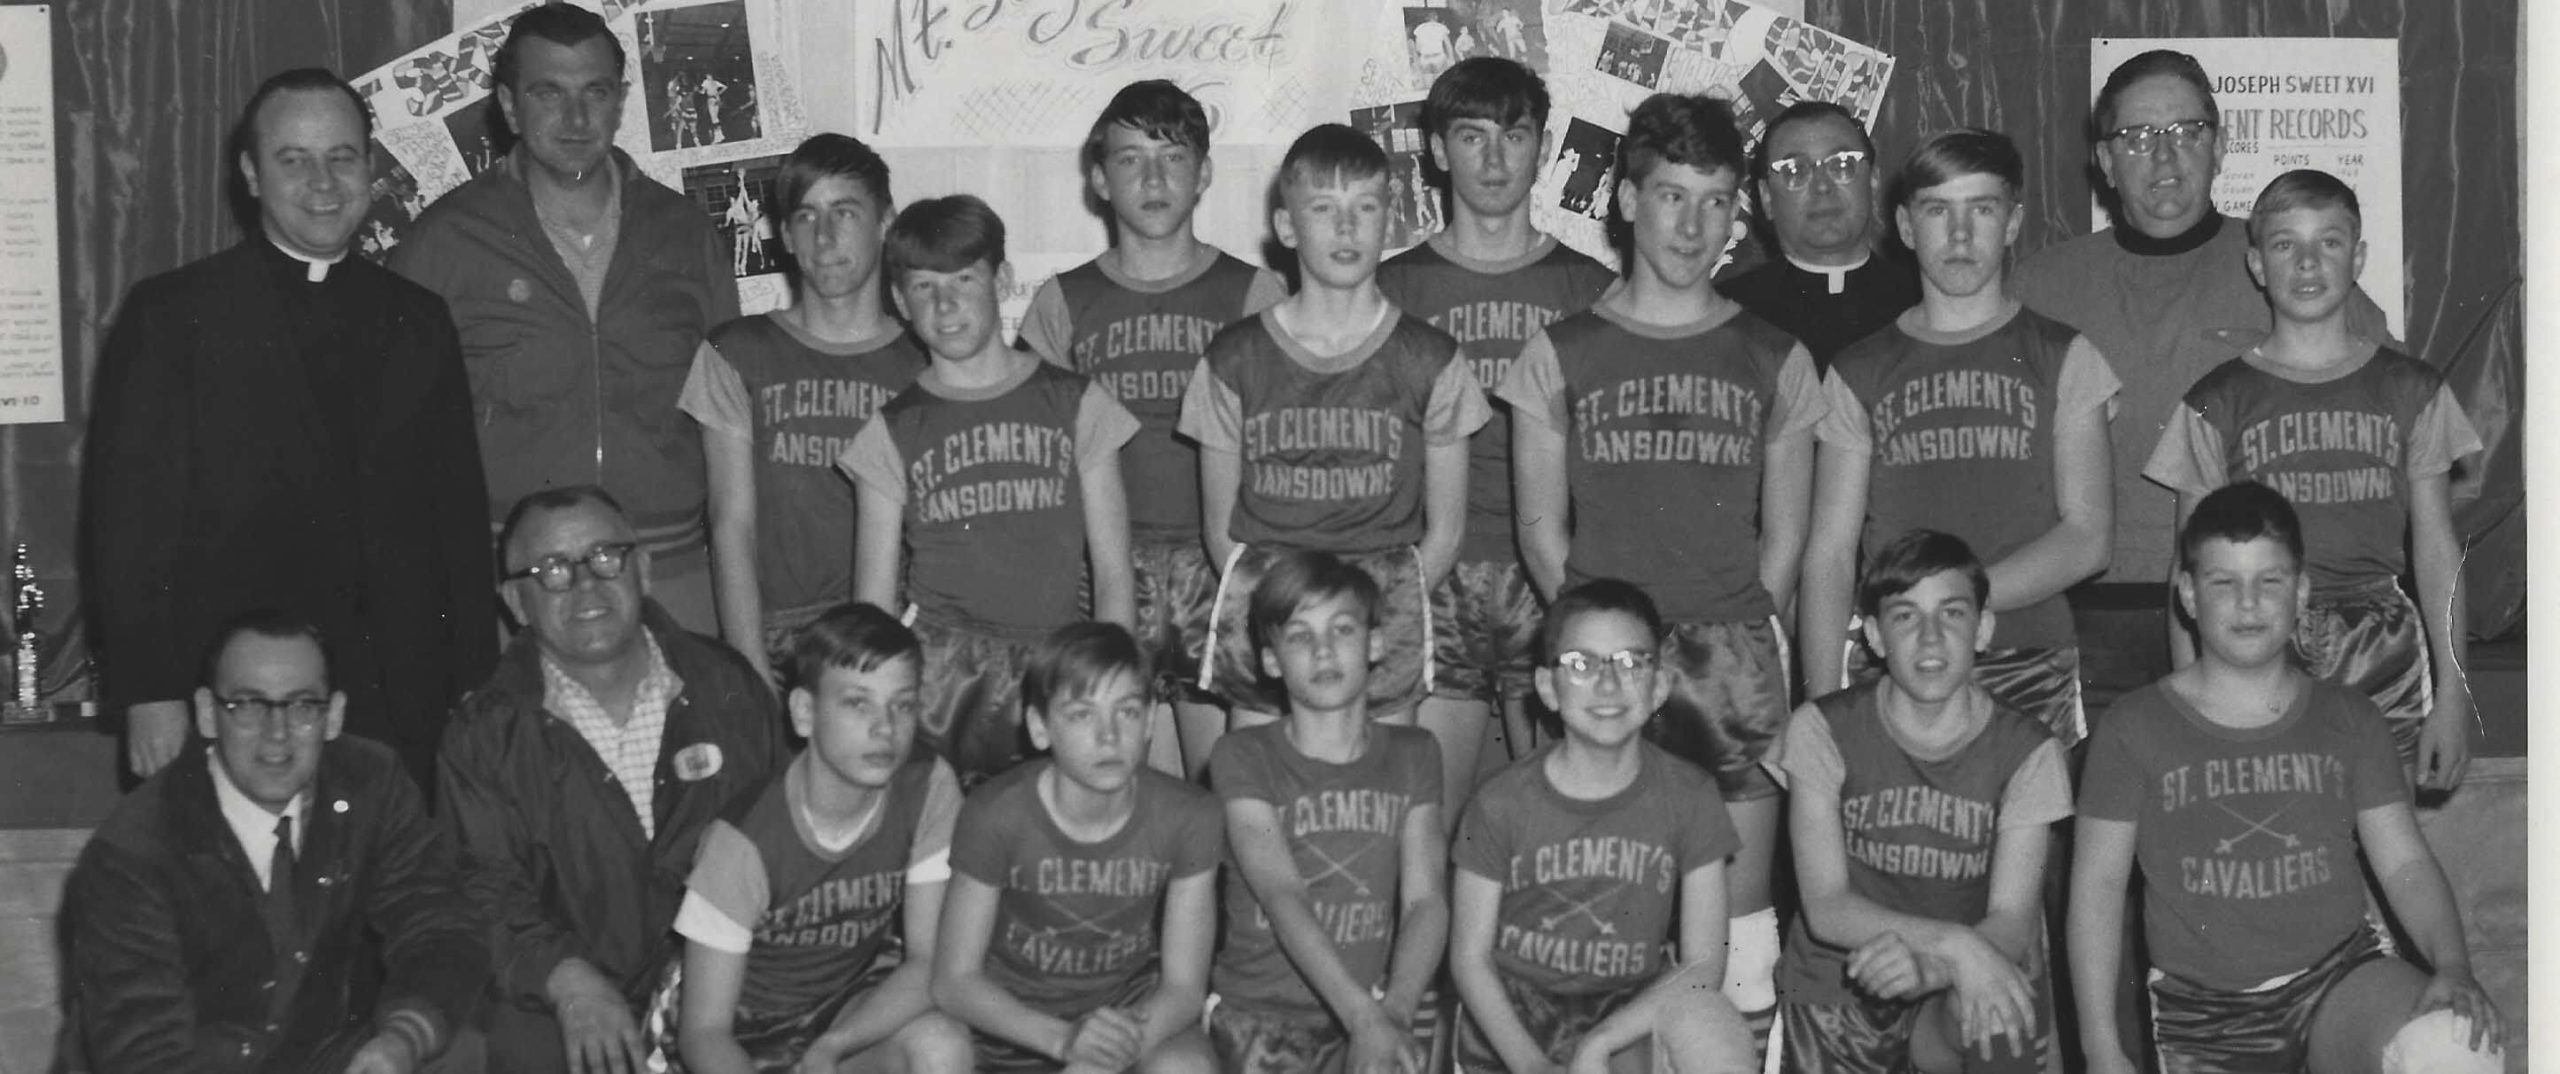 St. Clement basketball reunion honors late deacon who never stopped giving to Lansdowne